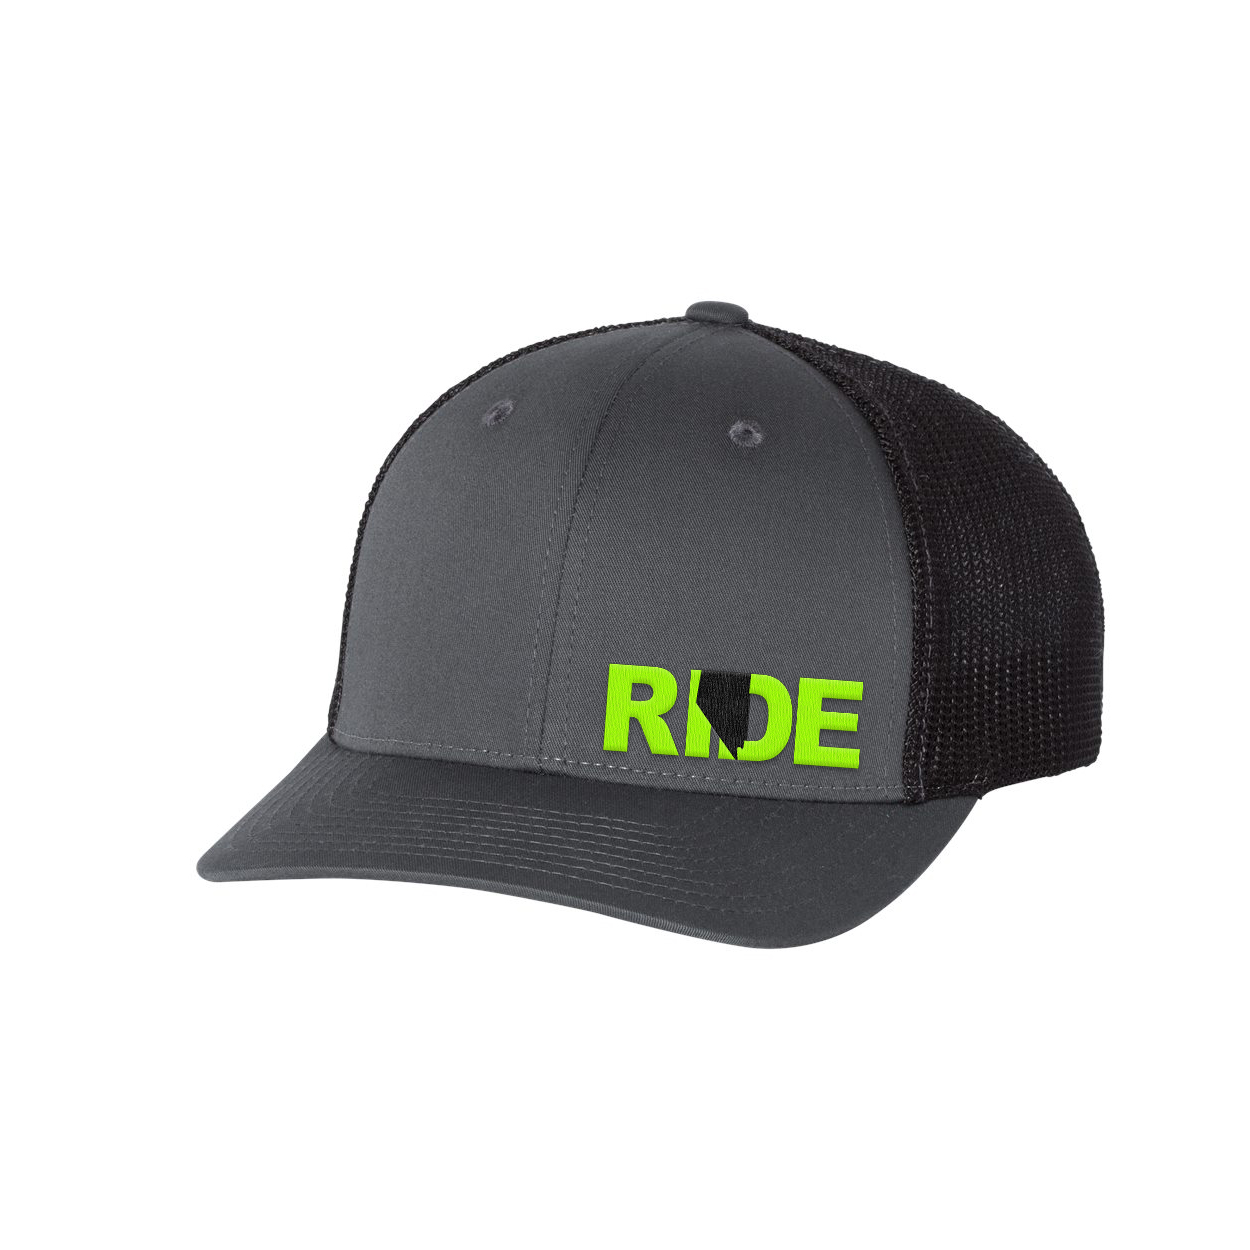 Ride Nevada Night Out Pro Embroidered Snapback Trucker Hat Gray/Black/Hi-Vis